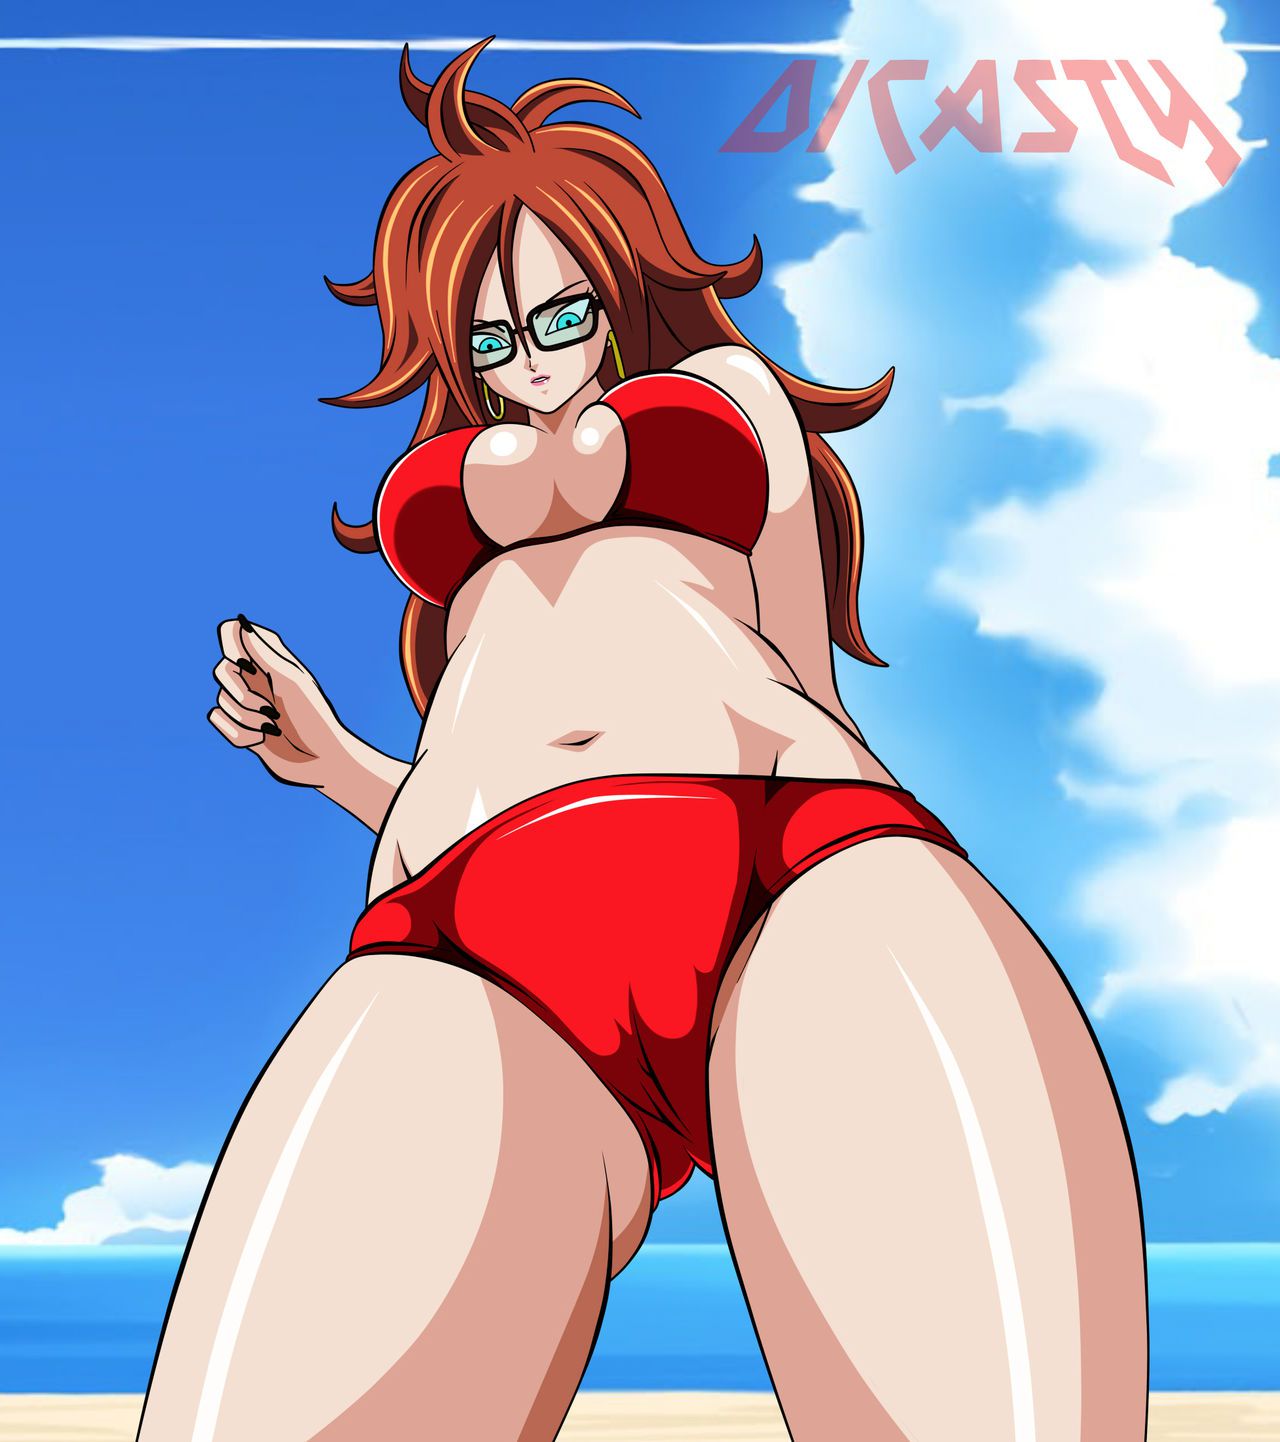 My Favorite Android 21 Pics 33